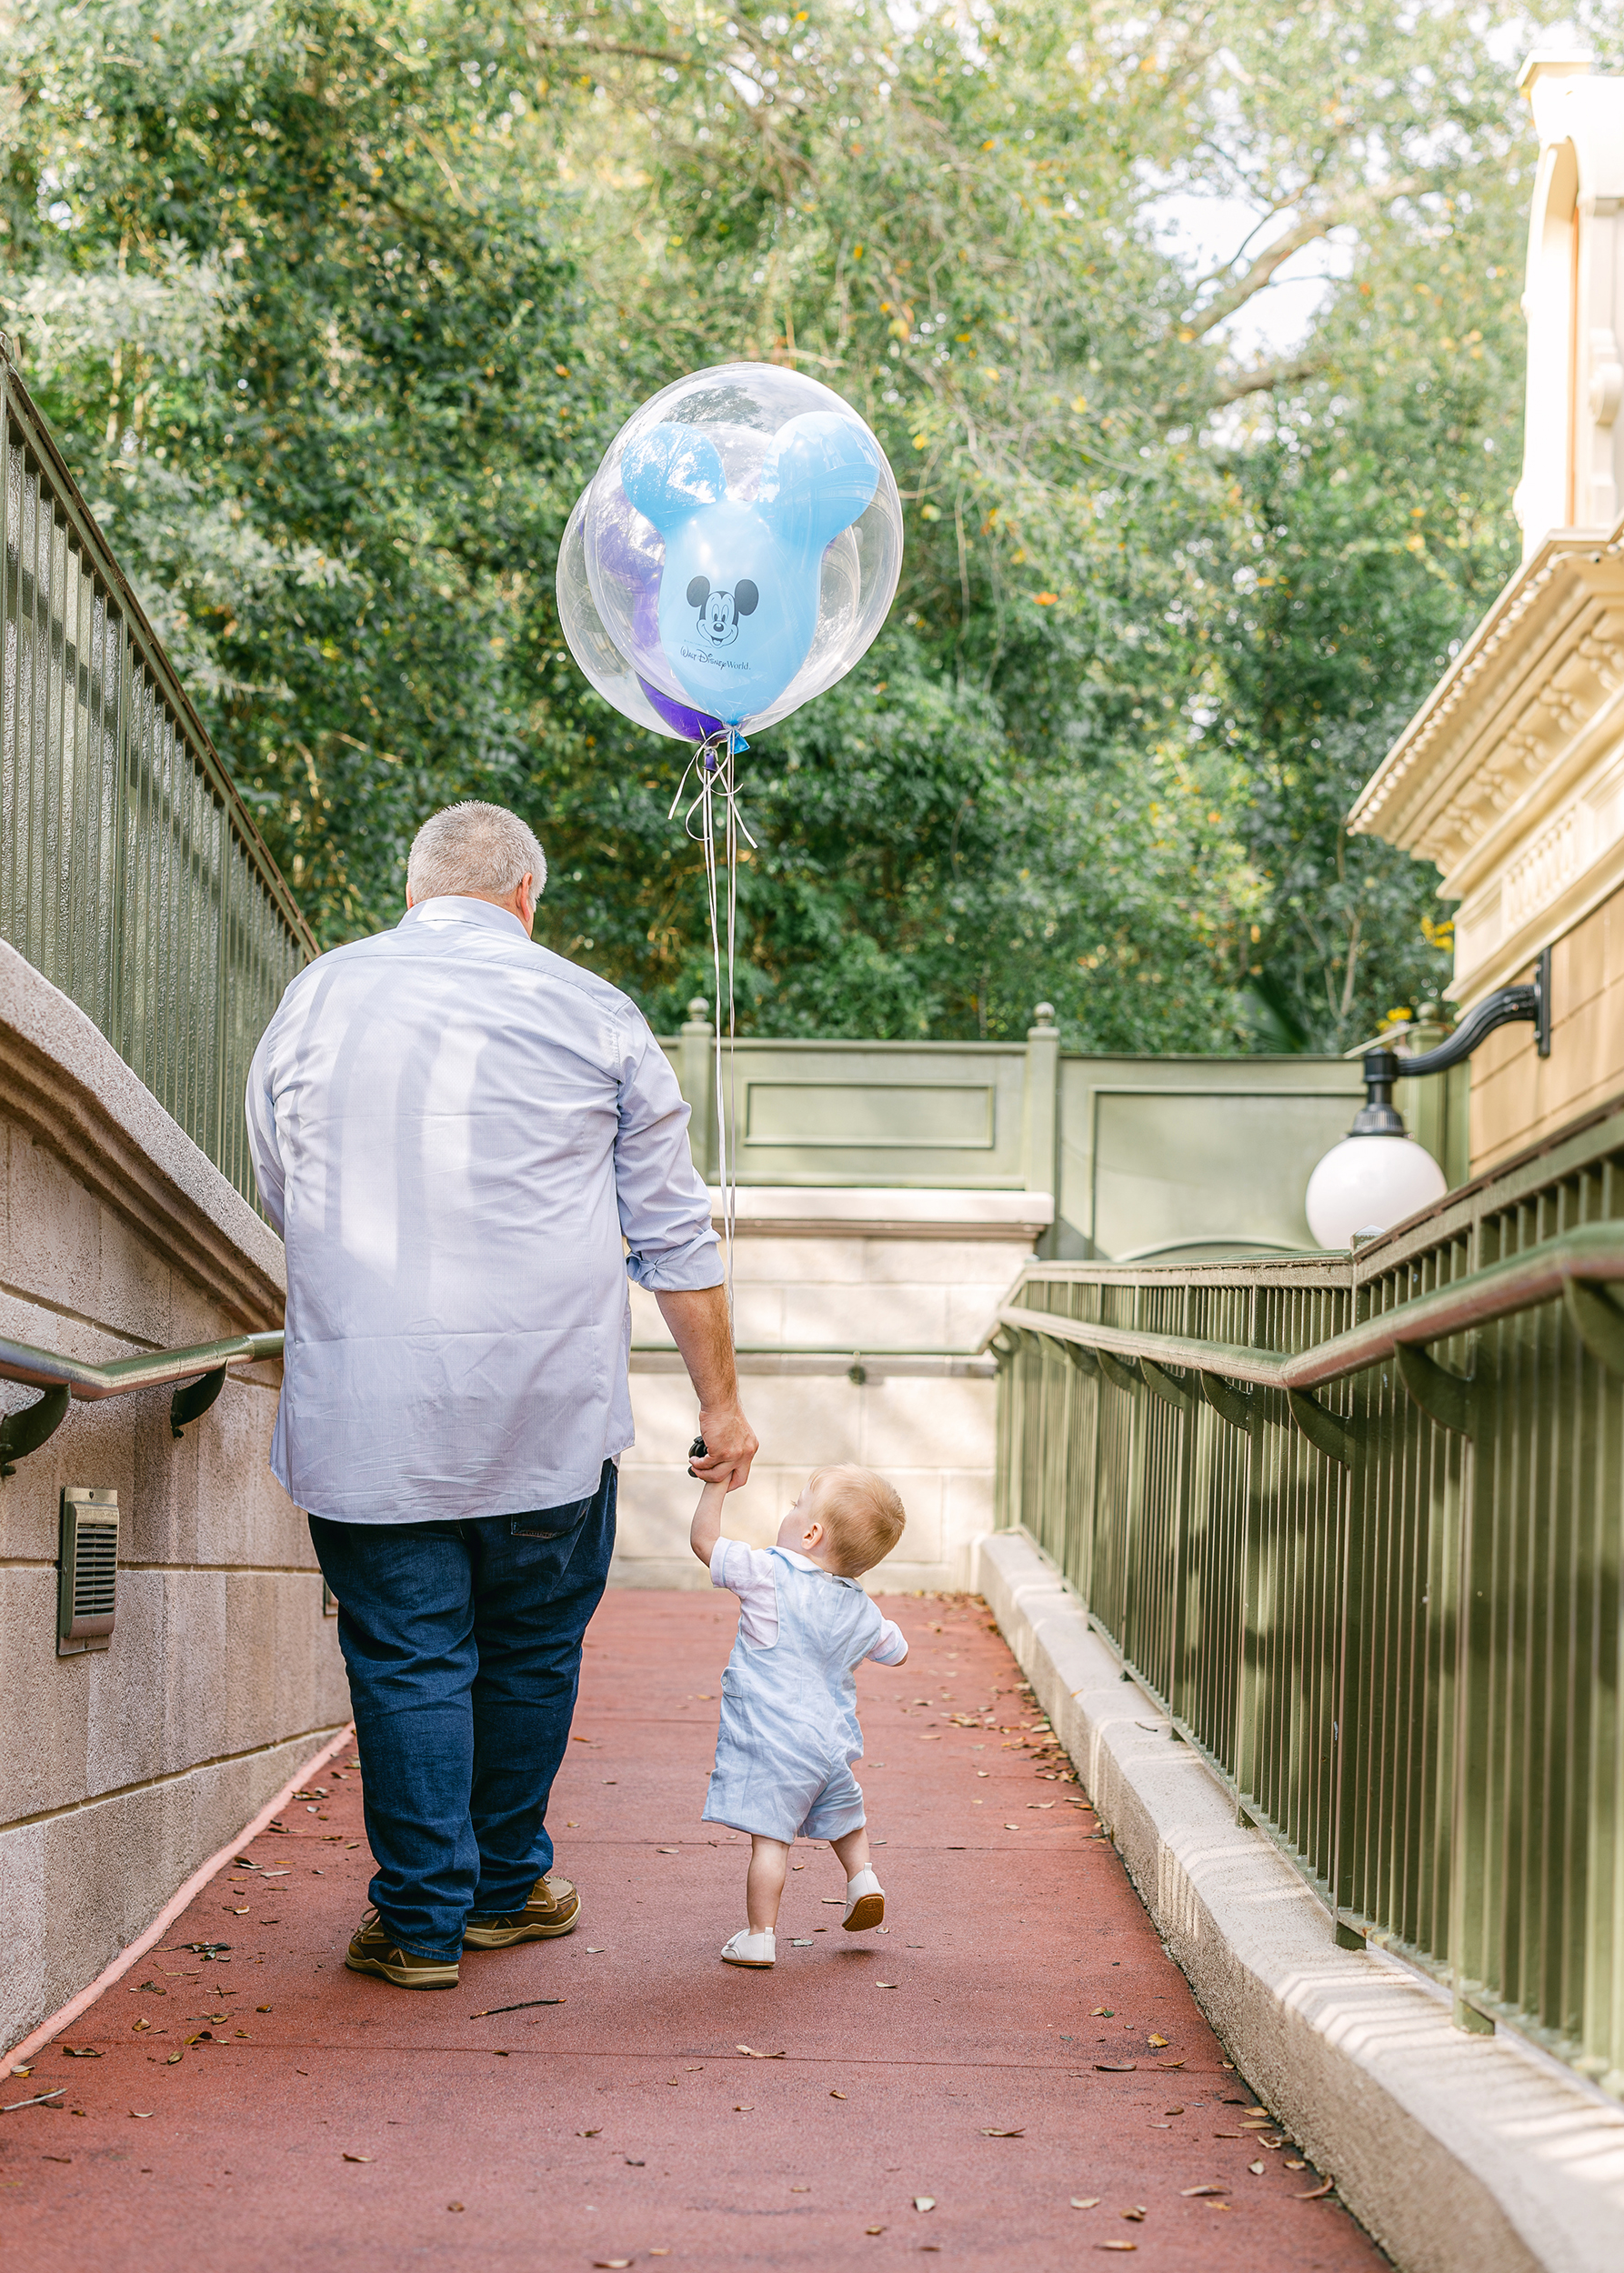 A baby boy dressed in blue and white holds a Mickey Balloon as he looks up at his father.